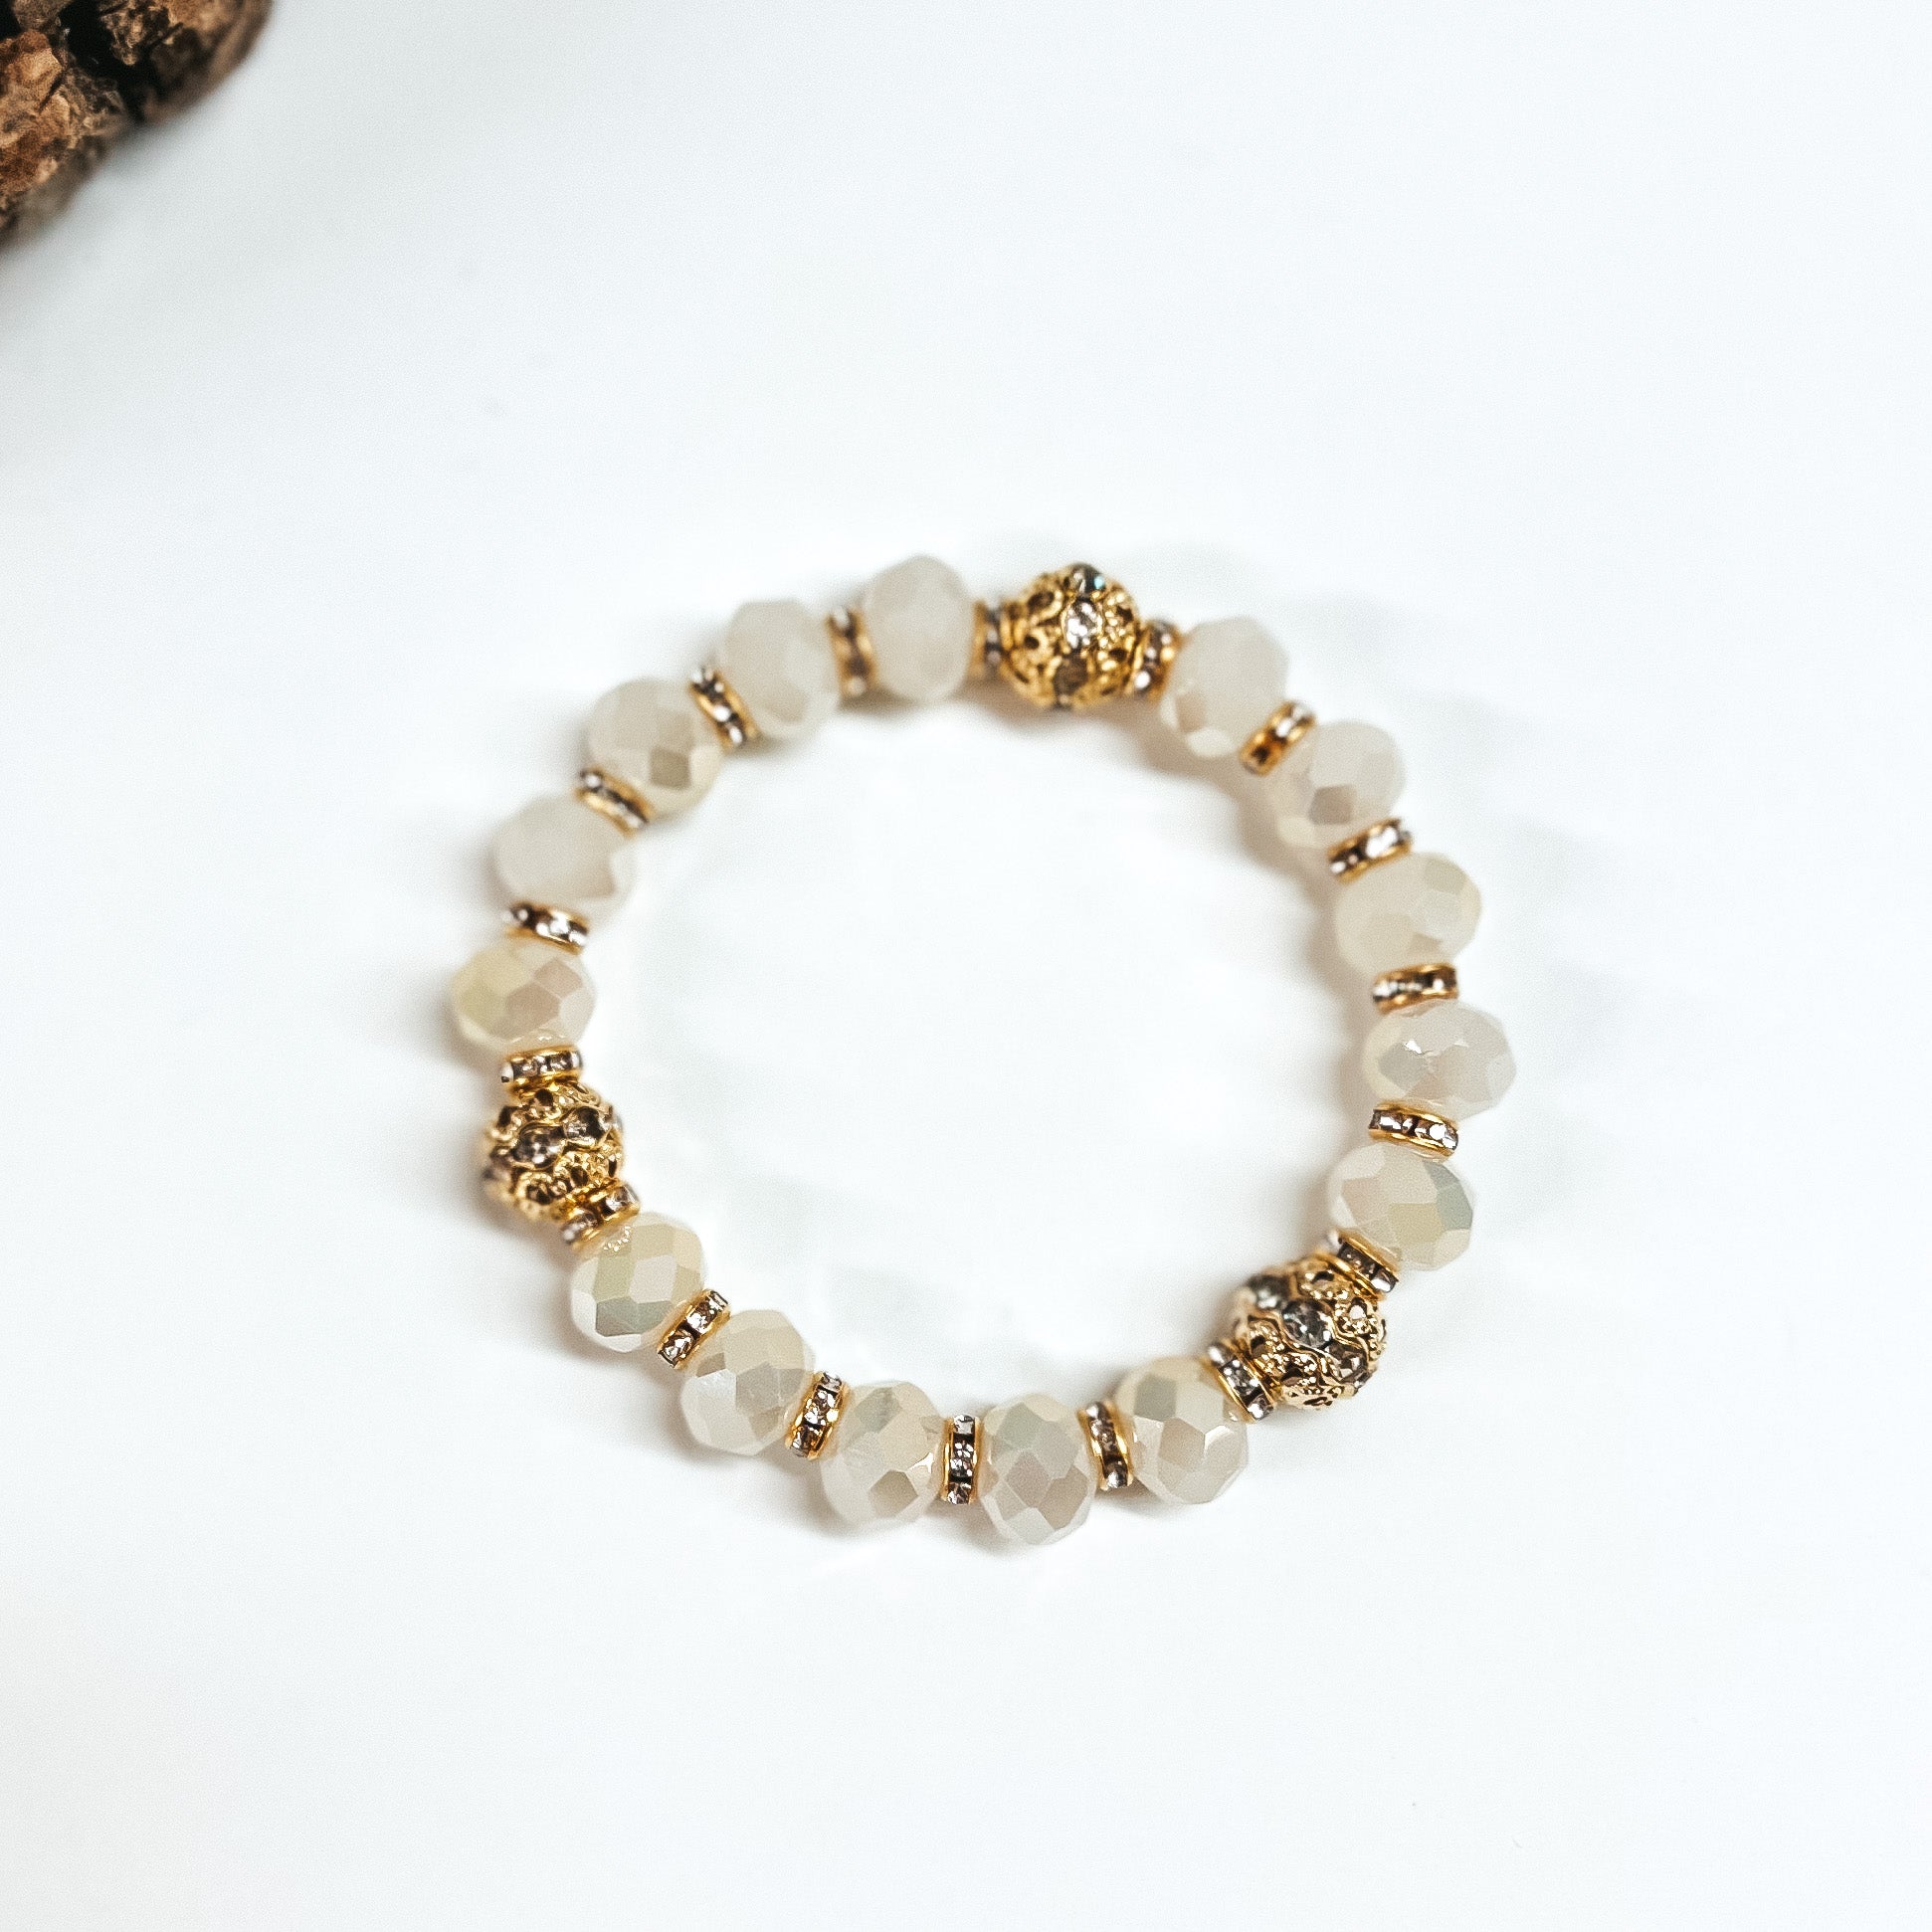 This is ivory crystal beaded bracelets with gold spacers. The gold spacers have clear crystals in them and there are three gold and crystals beads. This bracelet is taken on white background.